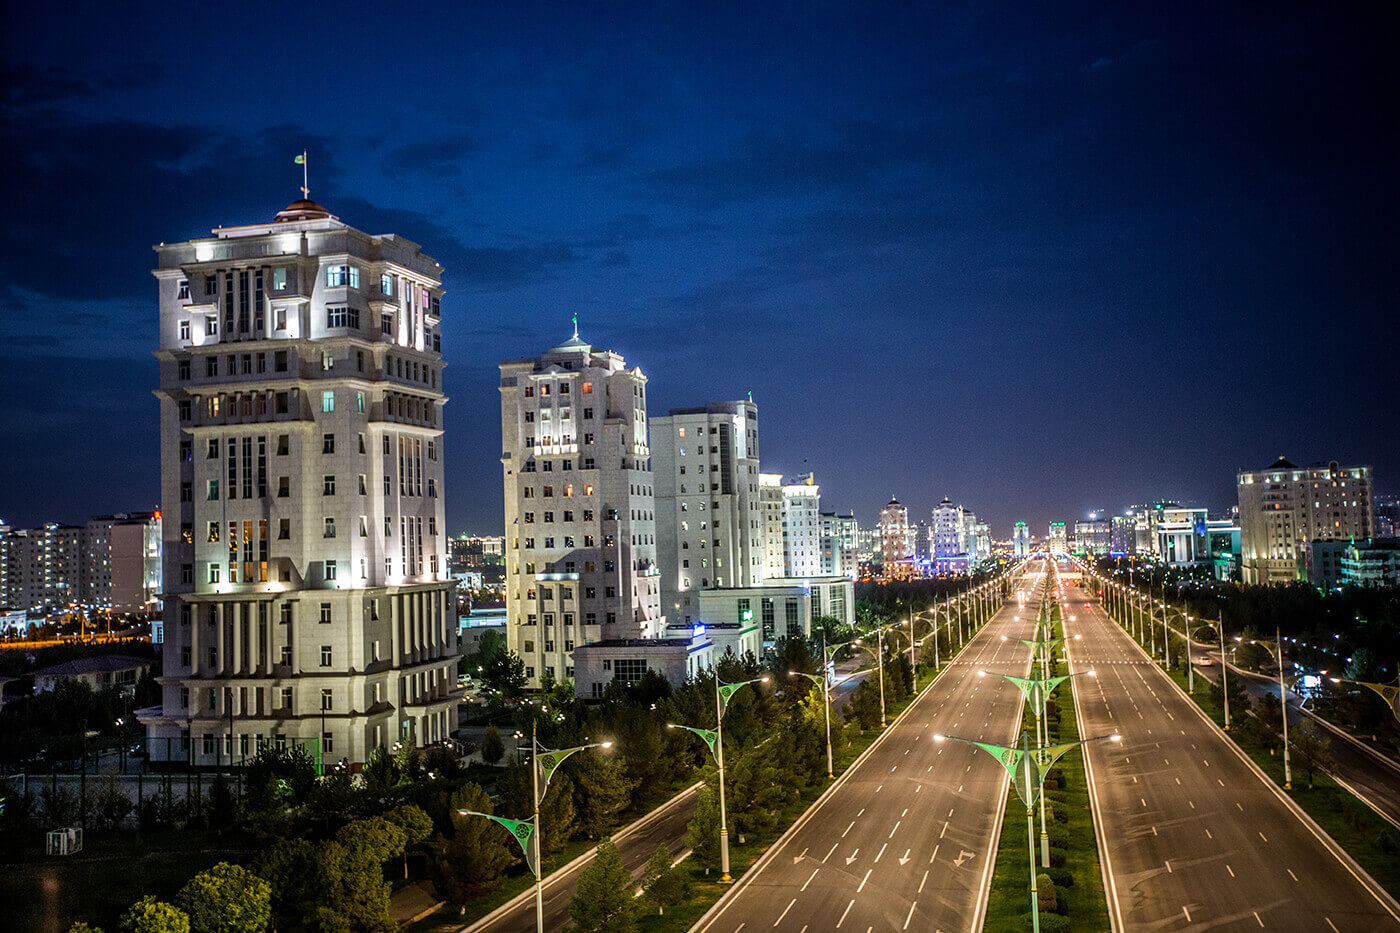 Night view of building and streets in Ashgabat